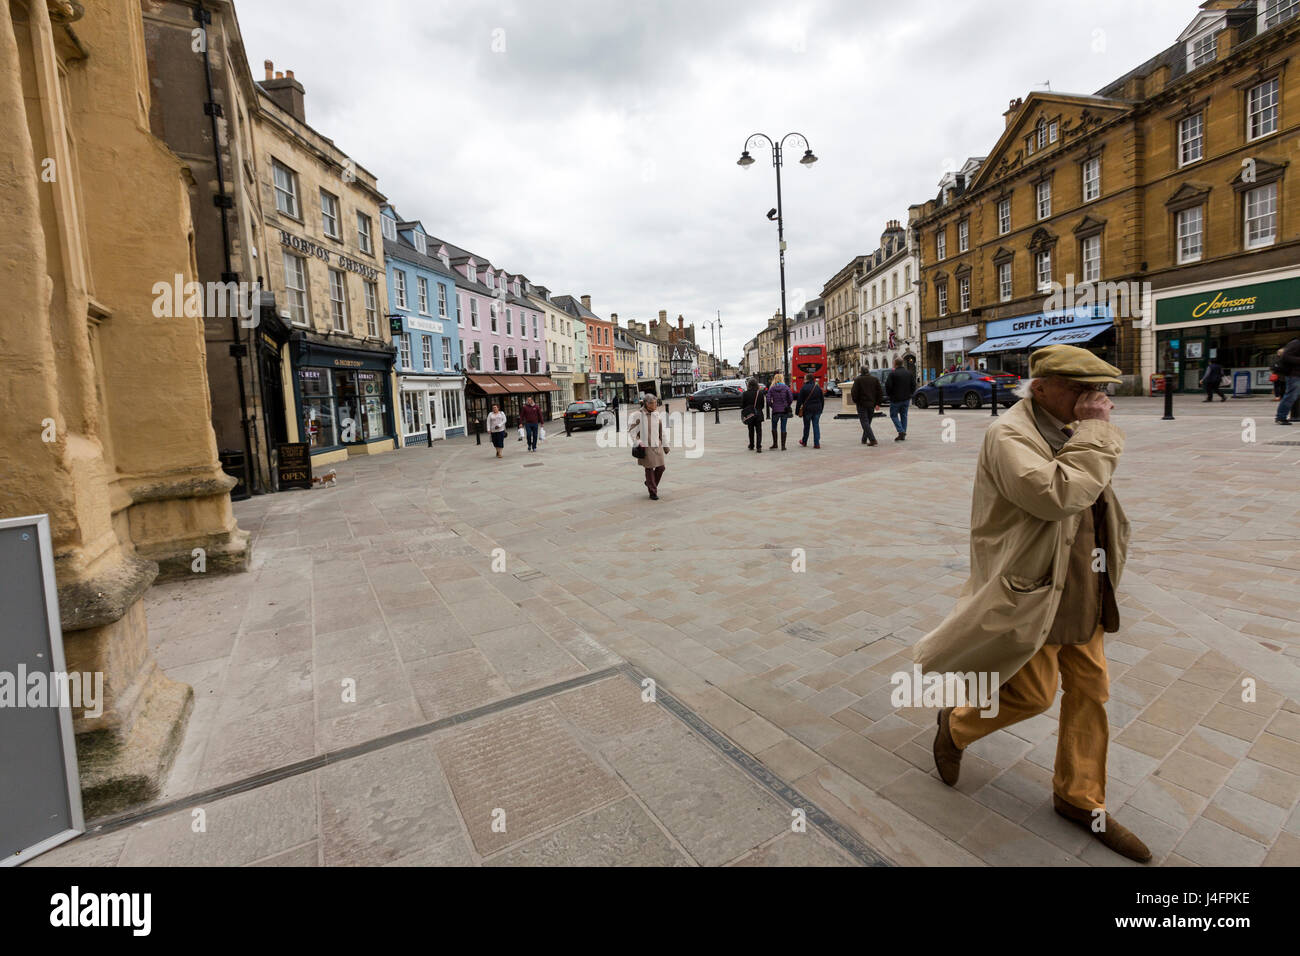 Man Walking in Market Place, Cirencester, Gloucestershire, Angleterre Banque D'Images